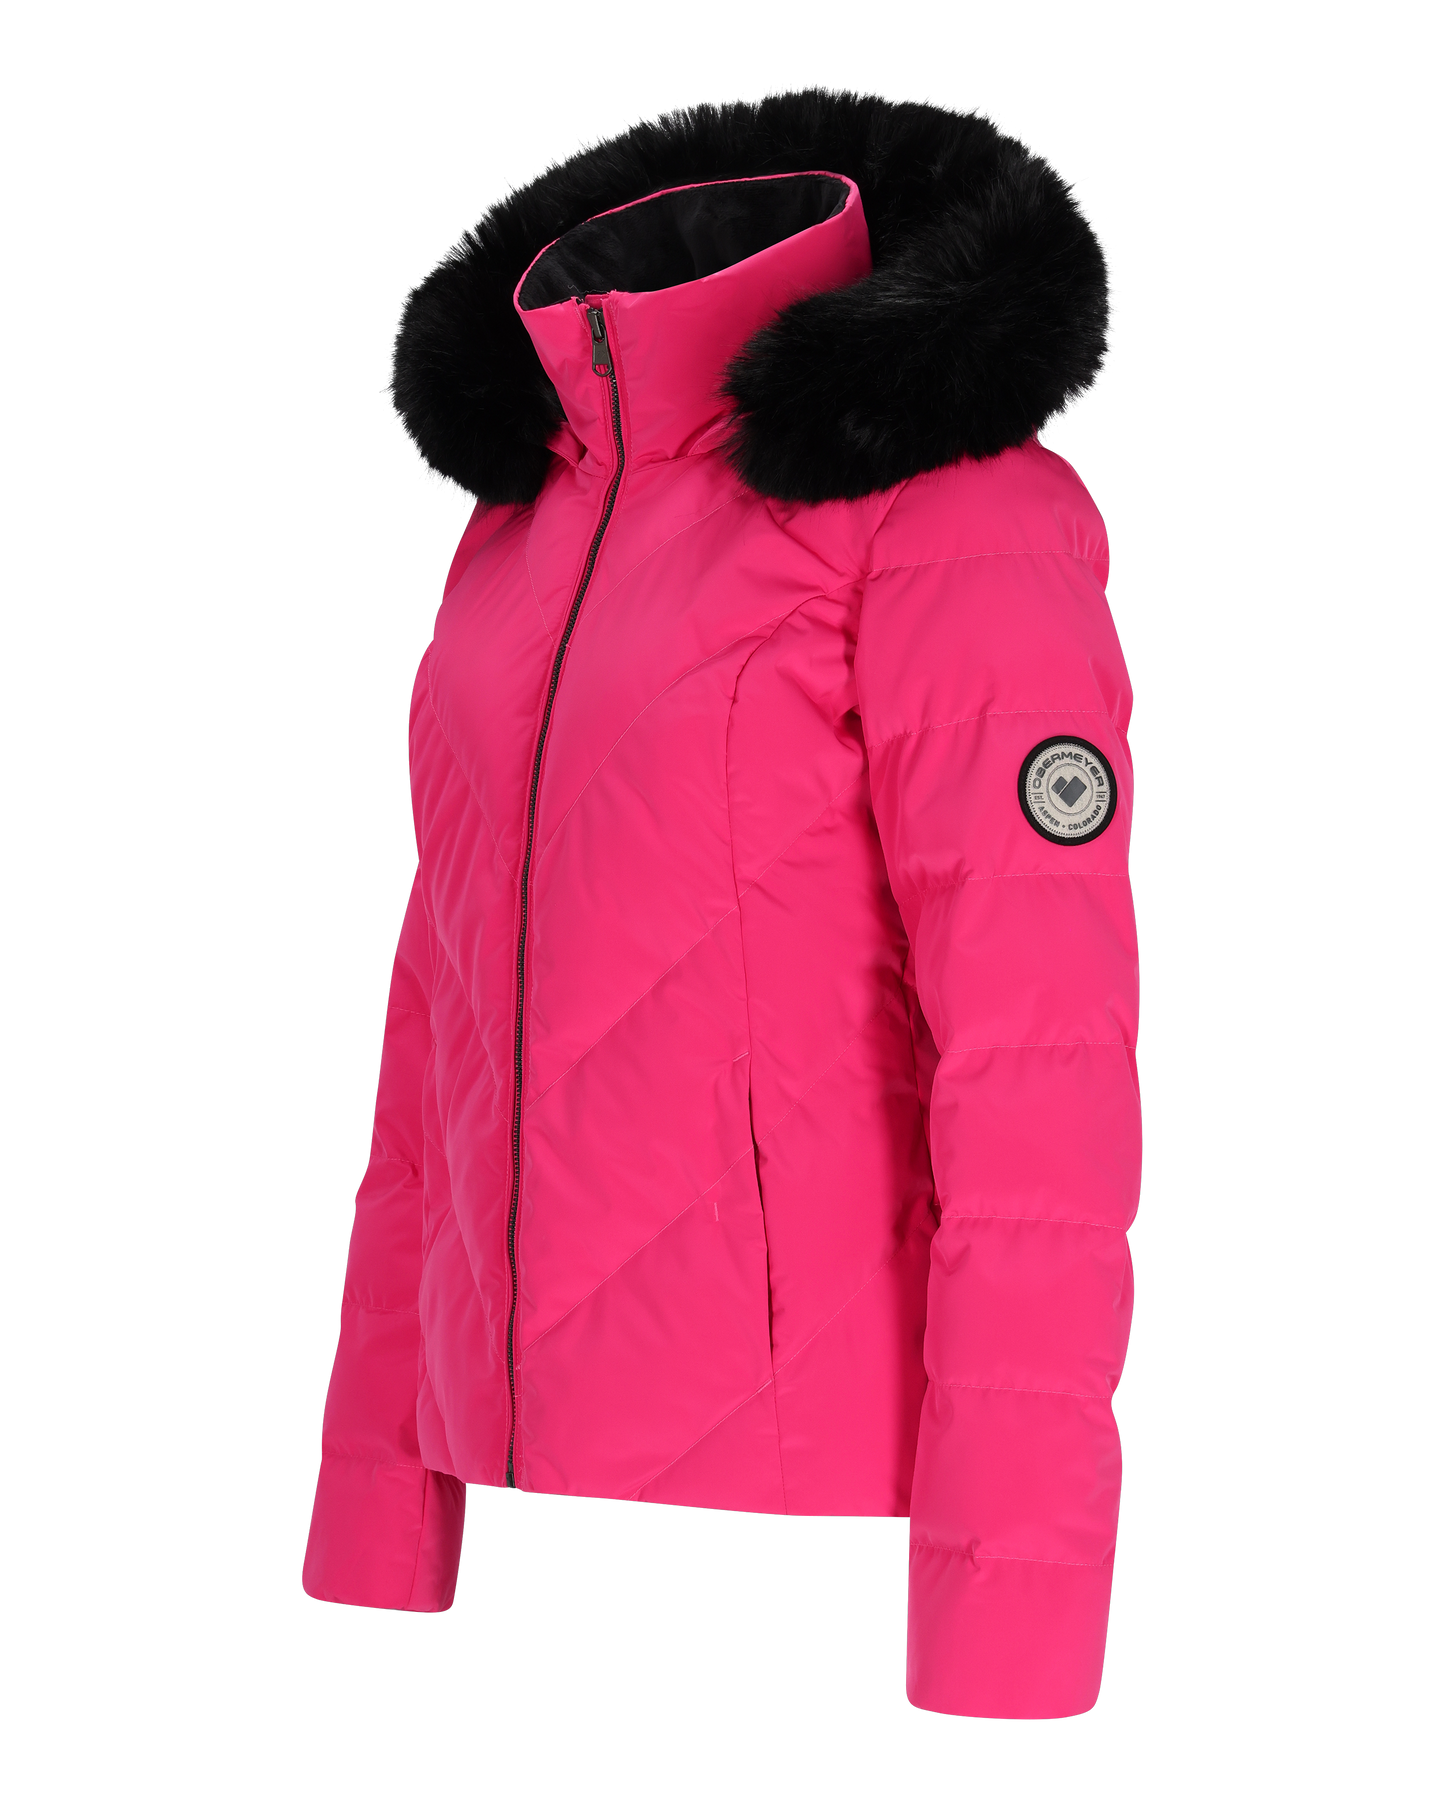 WinterWomen.com - The classic, iconic Obermeyer Bombshell is our favorite  jacket for winter. Who else loves this jacket?